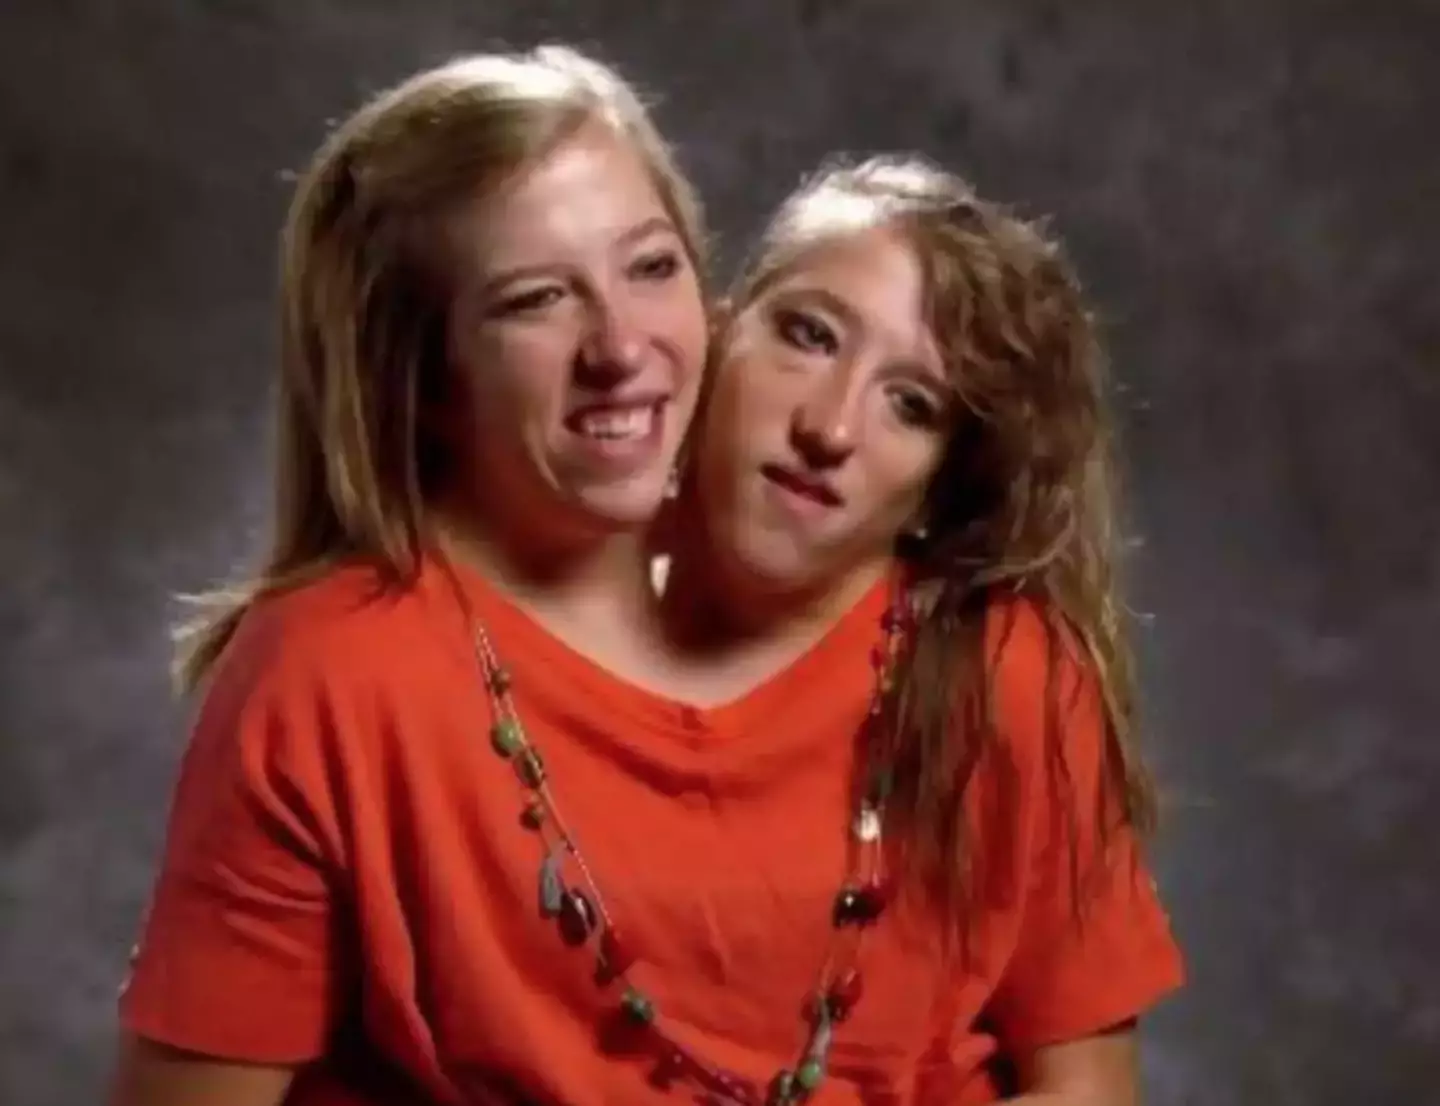 Conjoined twins Abby and Brittany Hensel shared details of Abby's 2021 wedding with Josh Bowling (TLC)